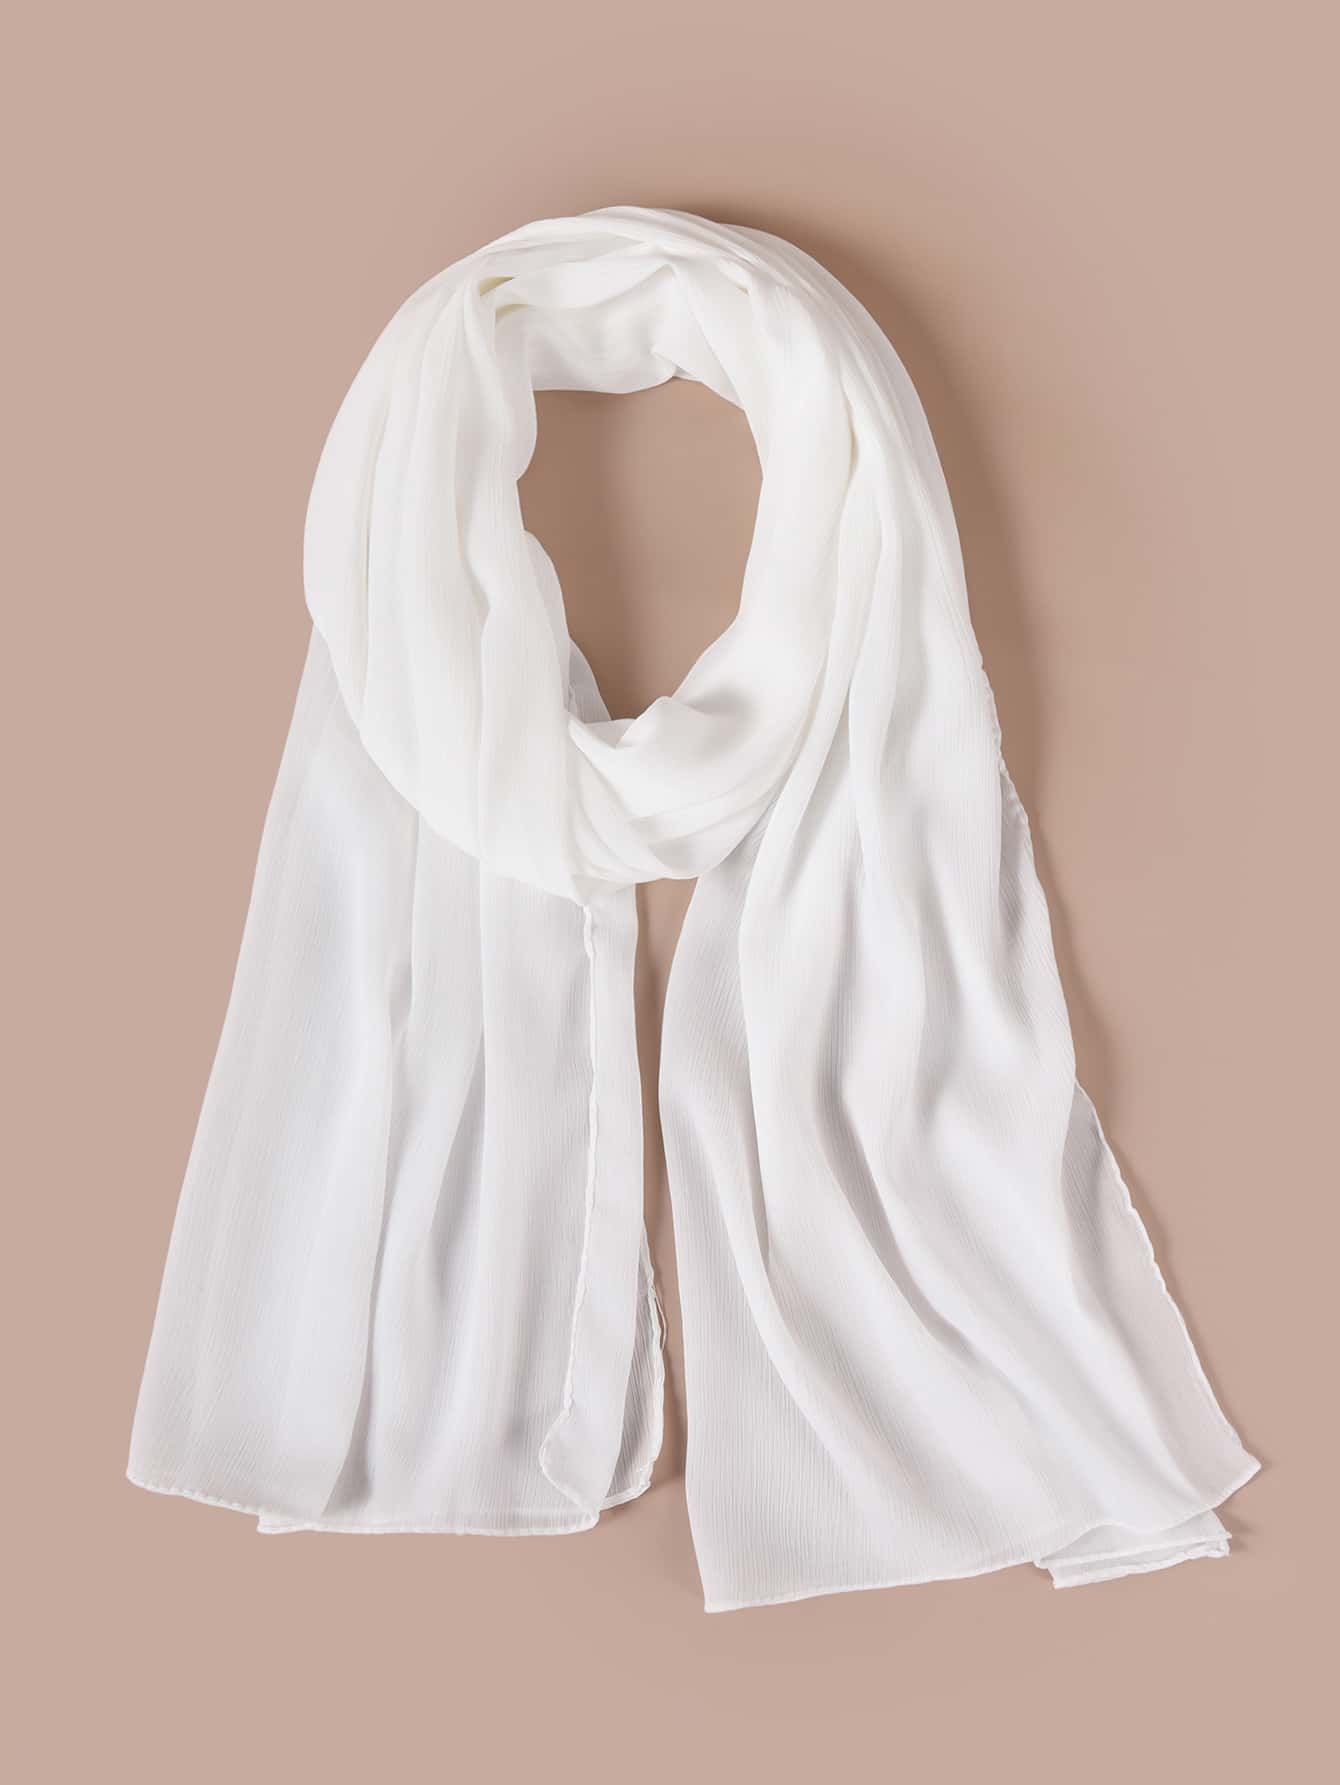 How to Wear White Scarf: Top 10 Cozy & Refreshing Outfit Ideas for Women